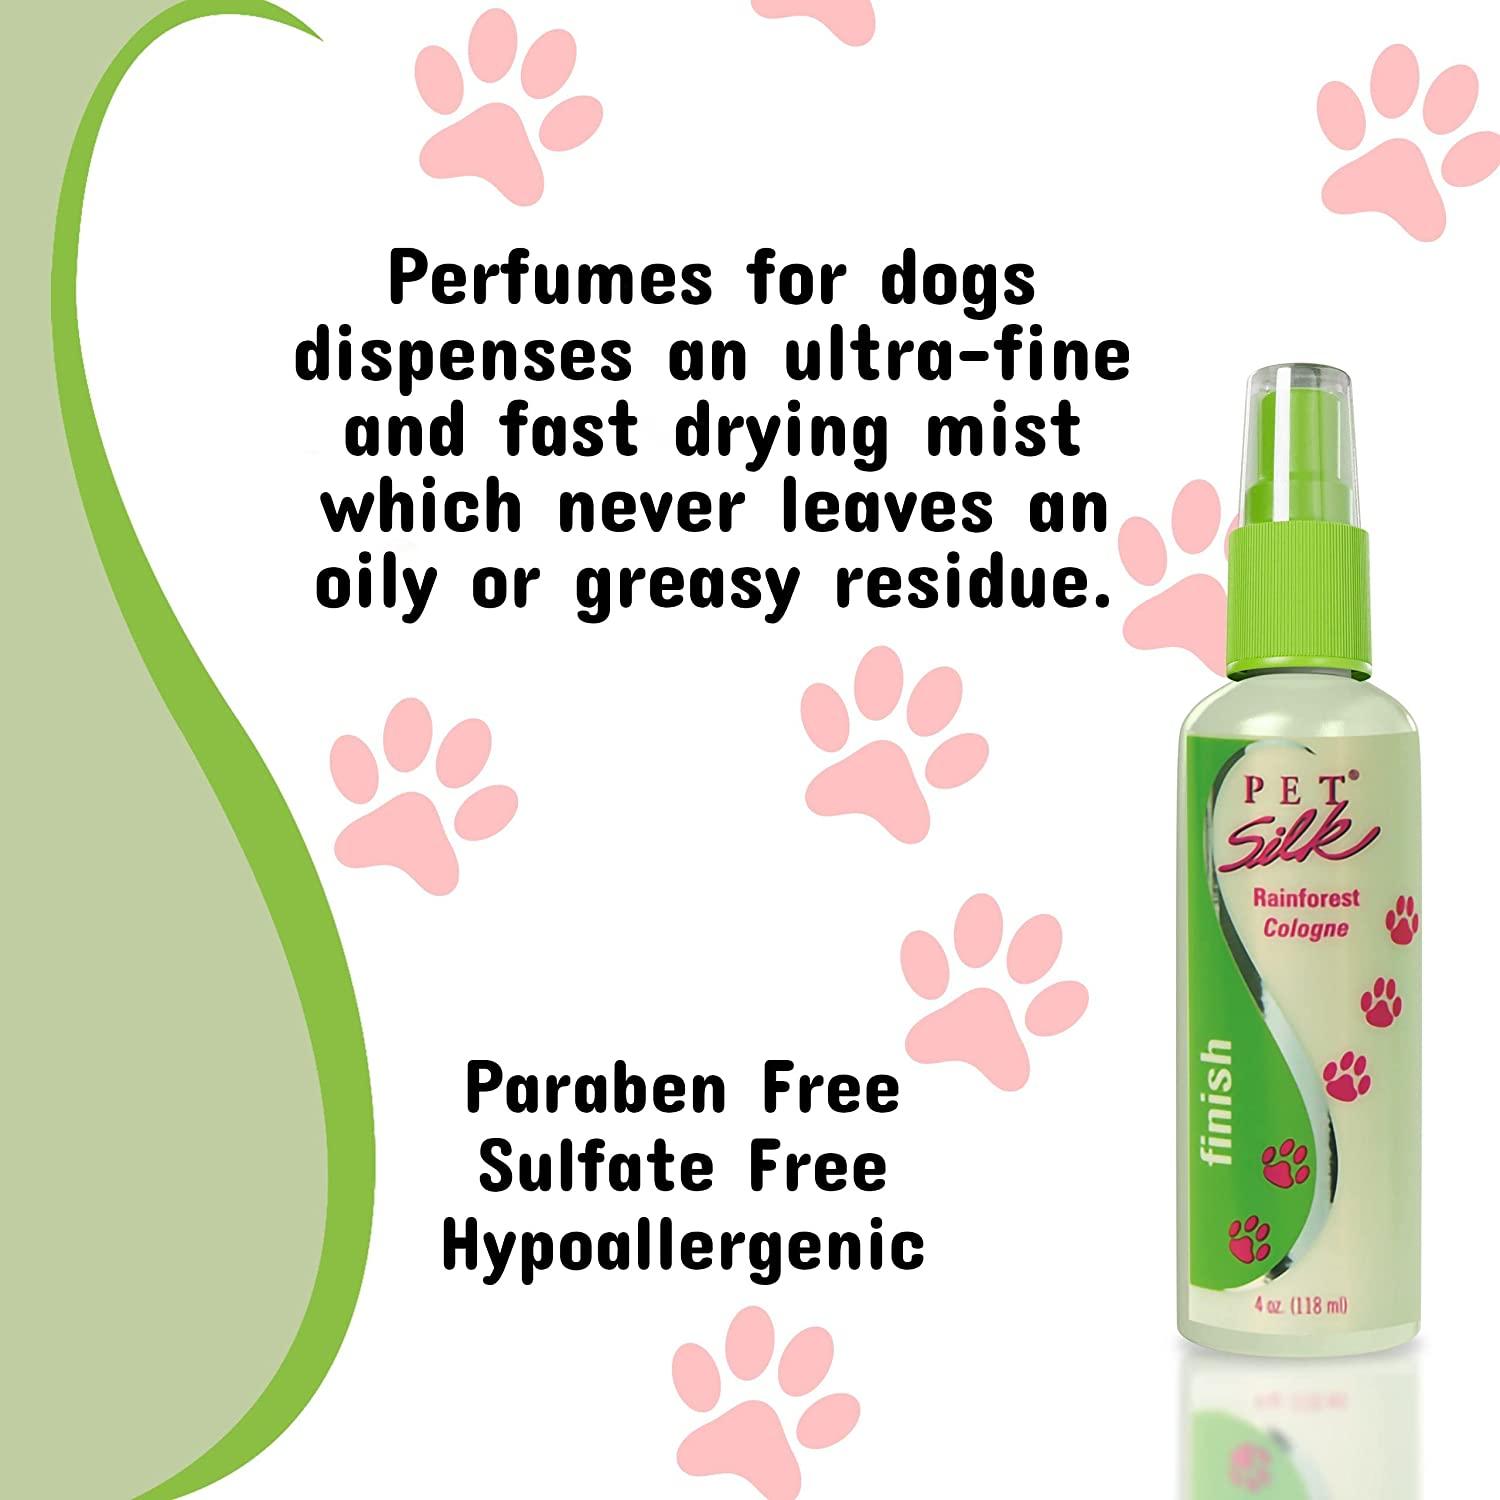 Pet Silk Rainforest Cologne (11.6 oz) - Dog Deodorant Perfume Body Spray with Conditioning Deodorizing Qualities Clean & Fresh Fragrance Pet Grooming Perfume for Cats Rainforest 11.6 Oz (Pack of 1)